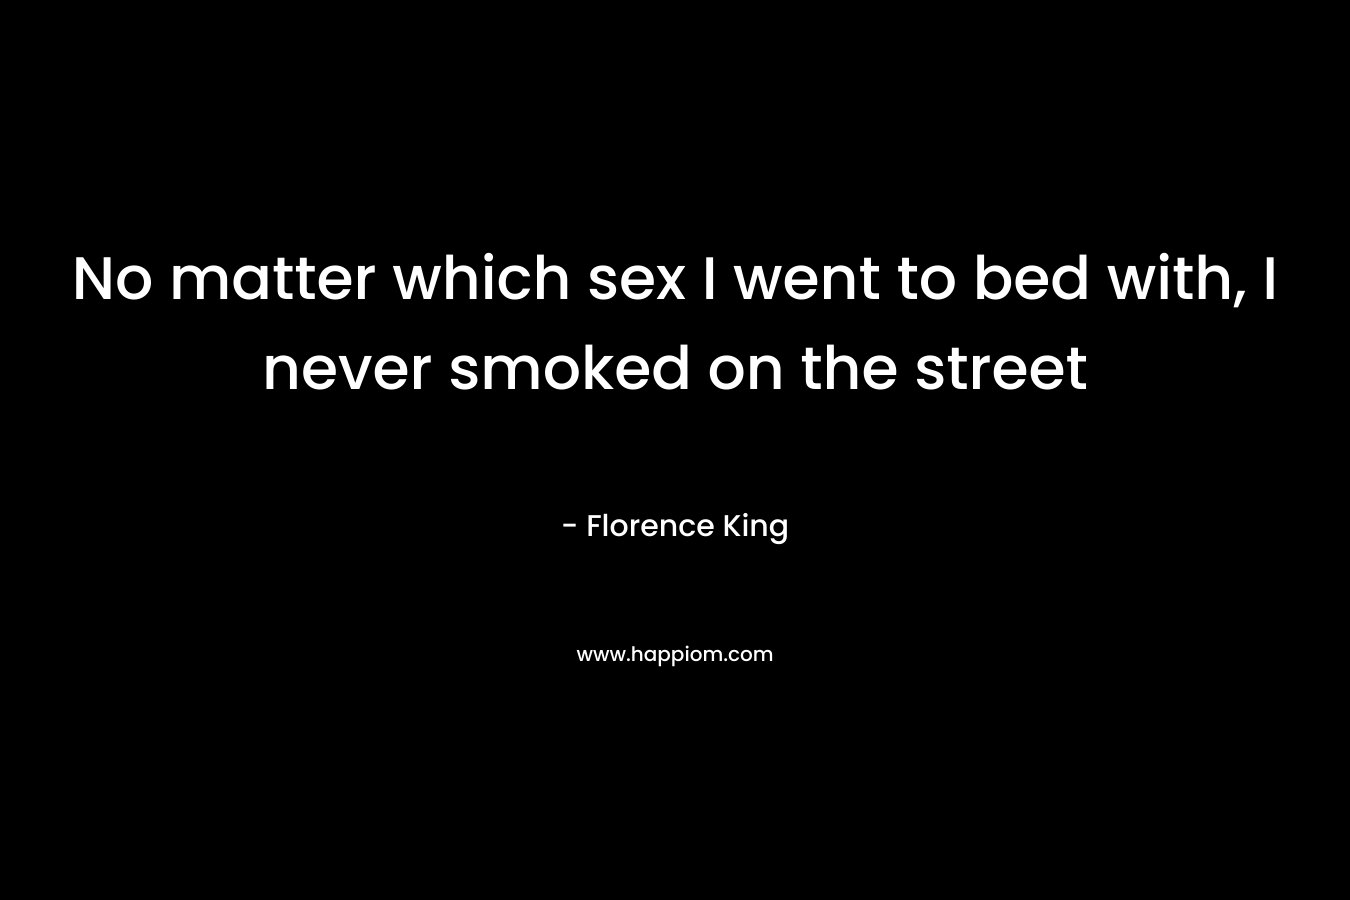 No matter which sex I went to bed with, I never smoked on the street – Florence King